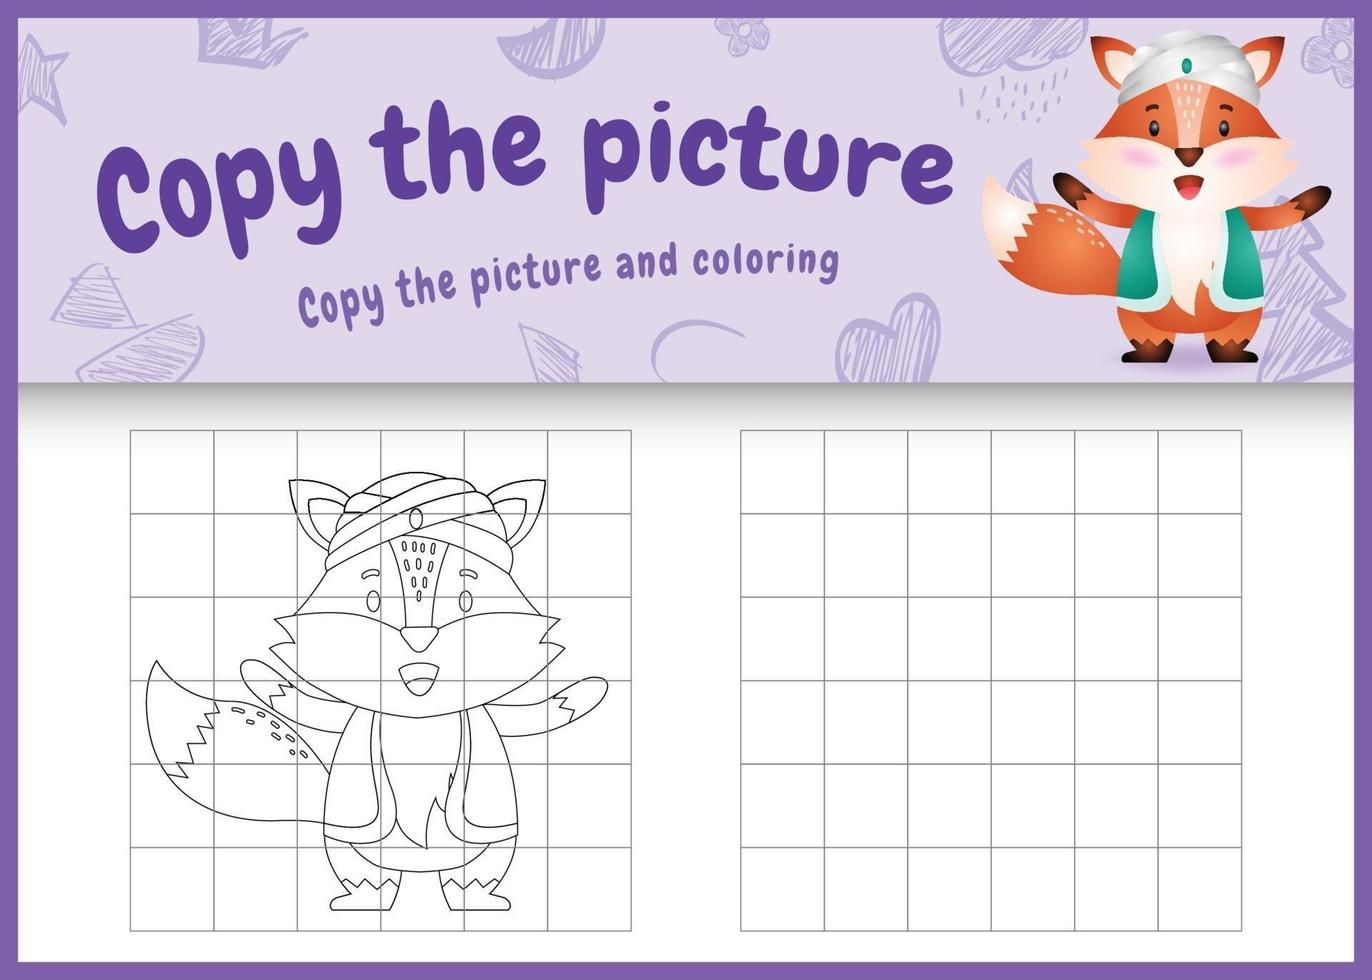 copy the picture kids game and coloring page themed ramadan with a cute fox using arabic traditional costume vector